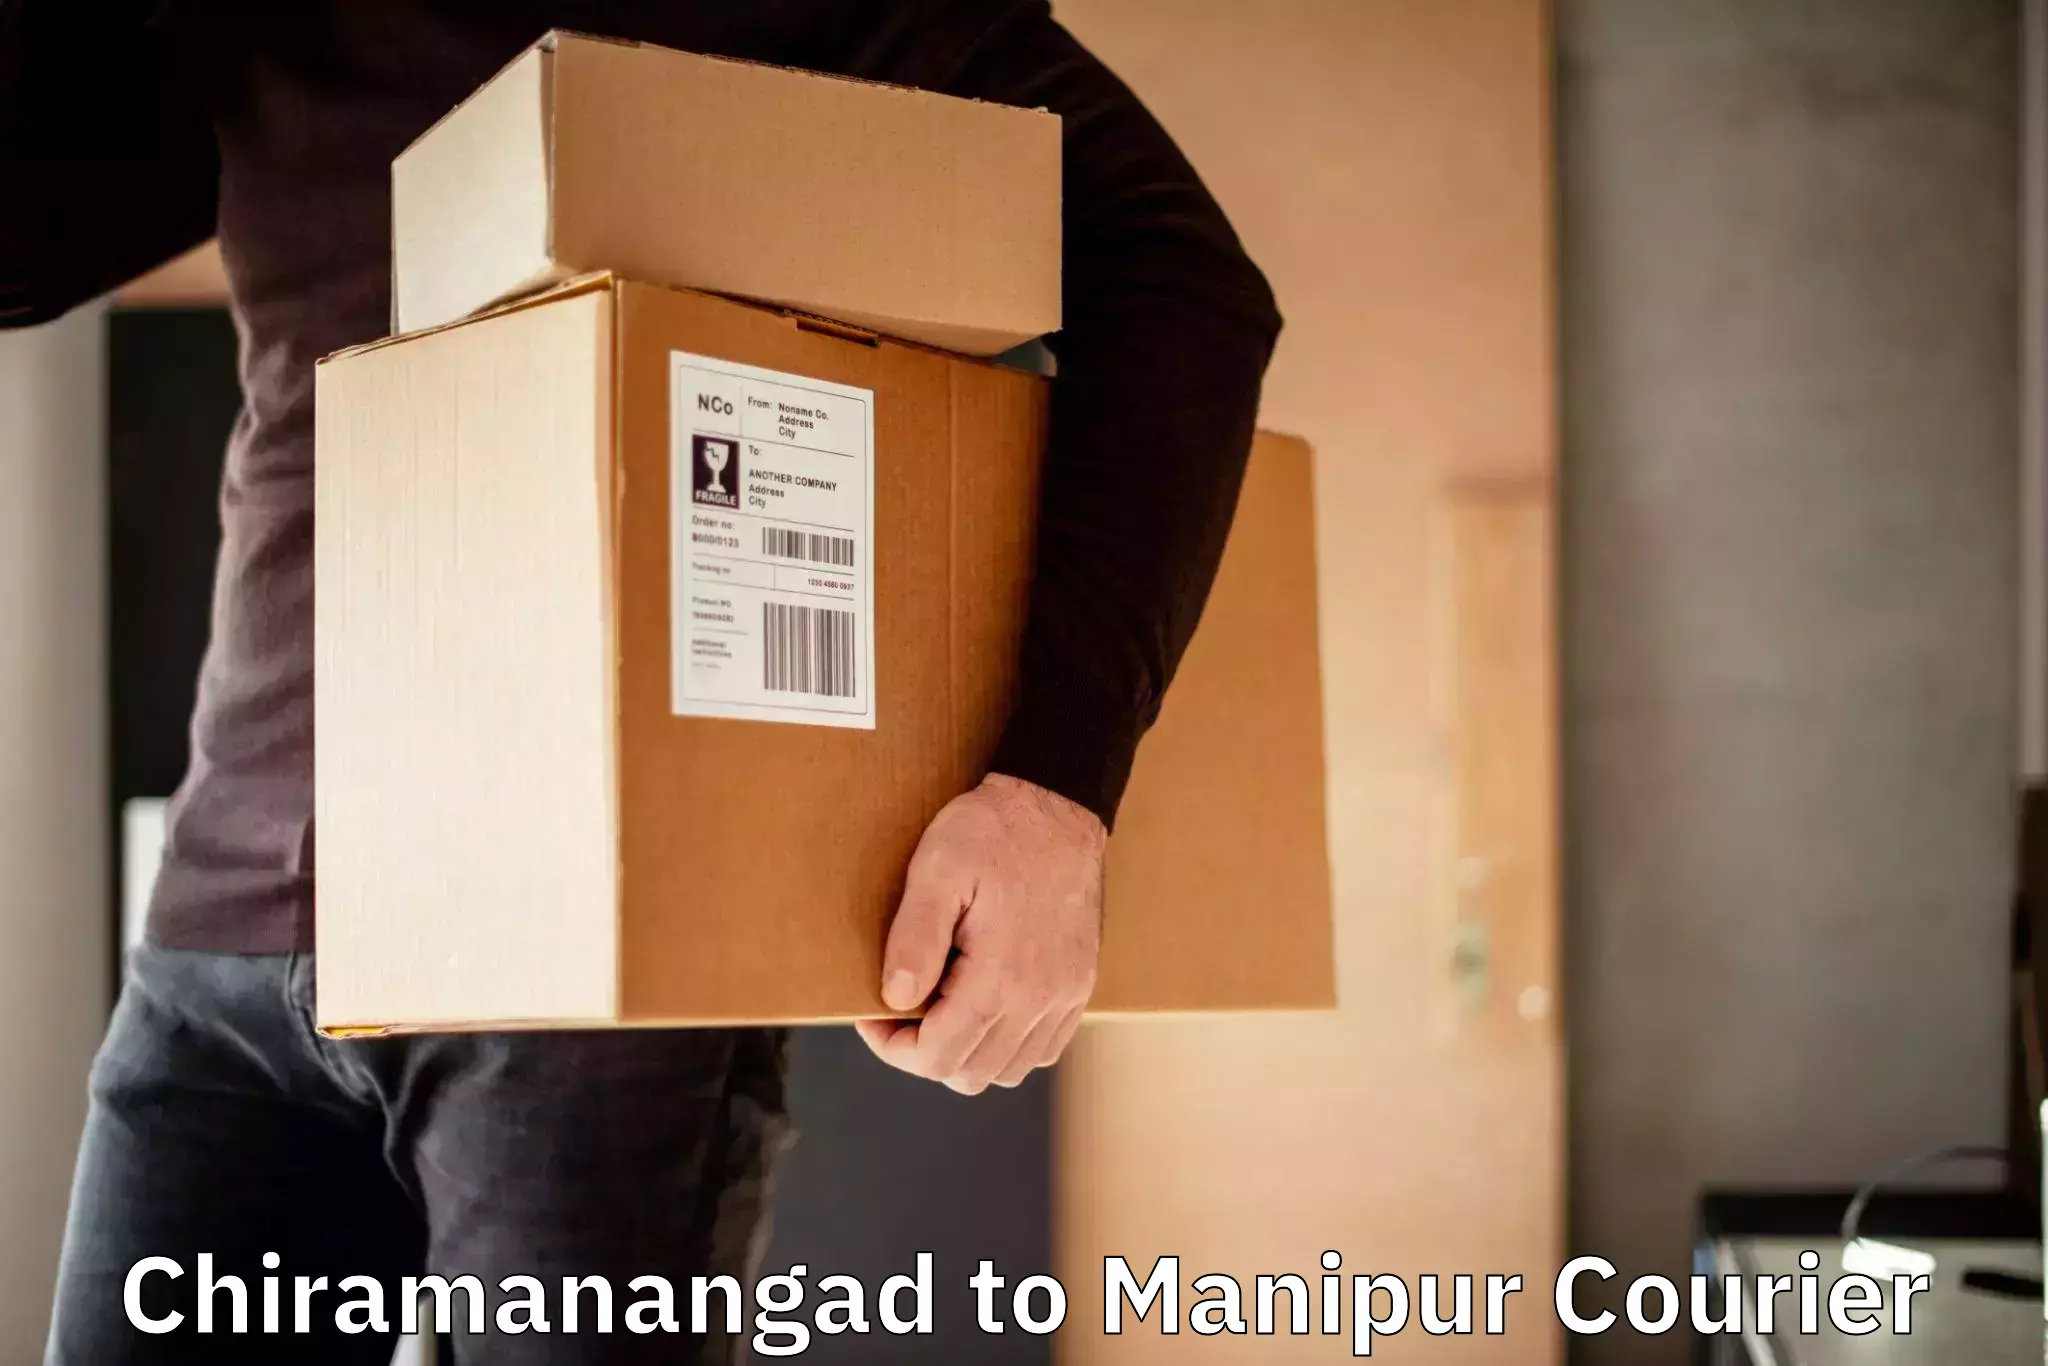 Bulk courier orders in Chiramanangad to Manipur